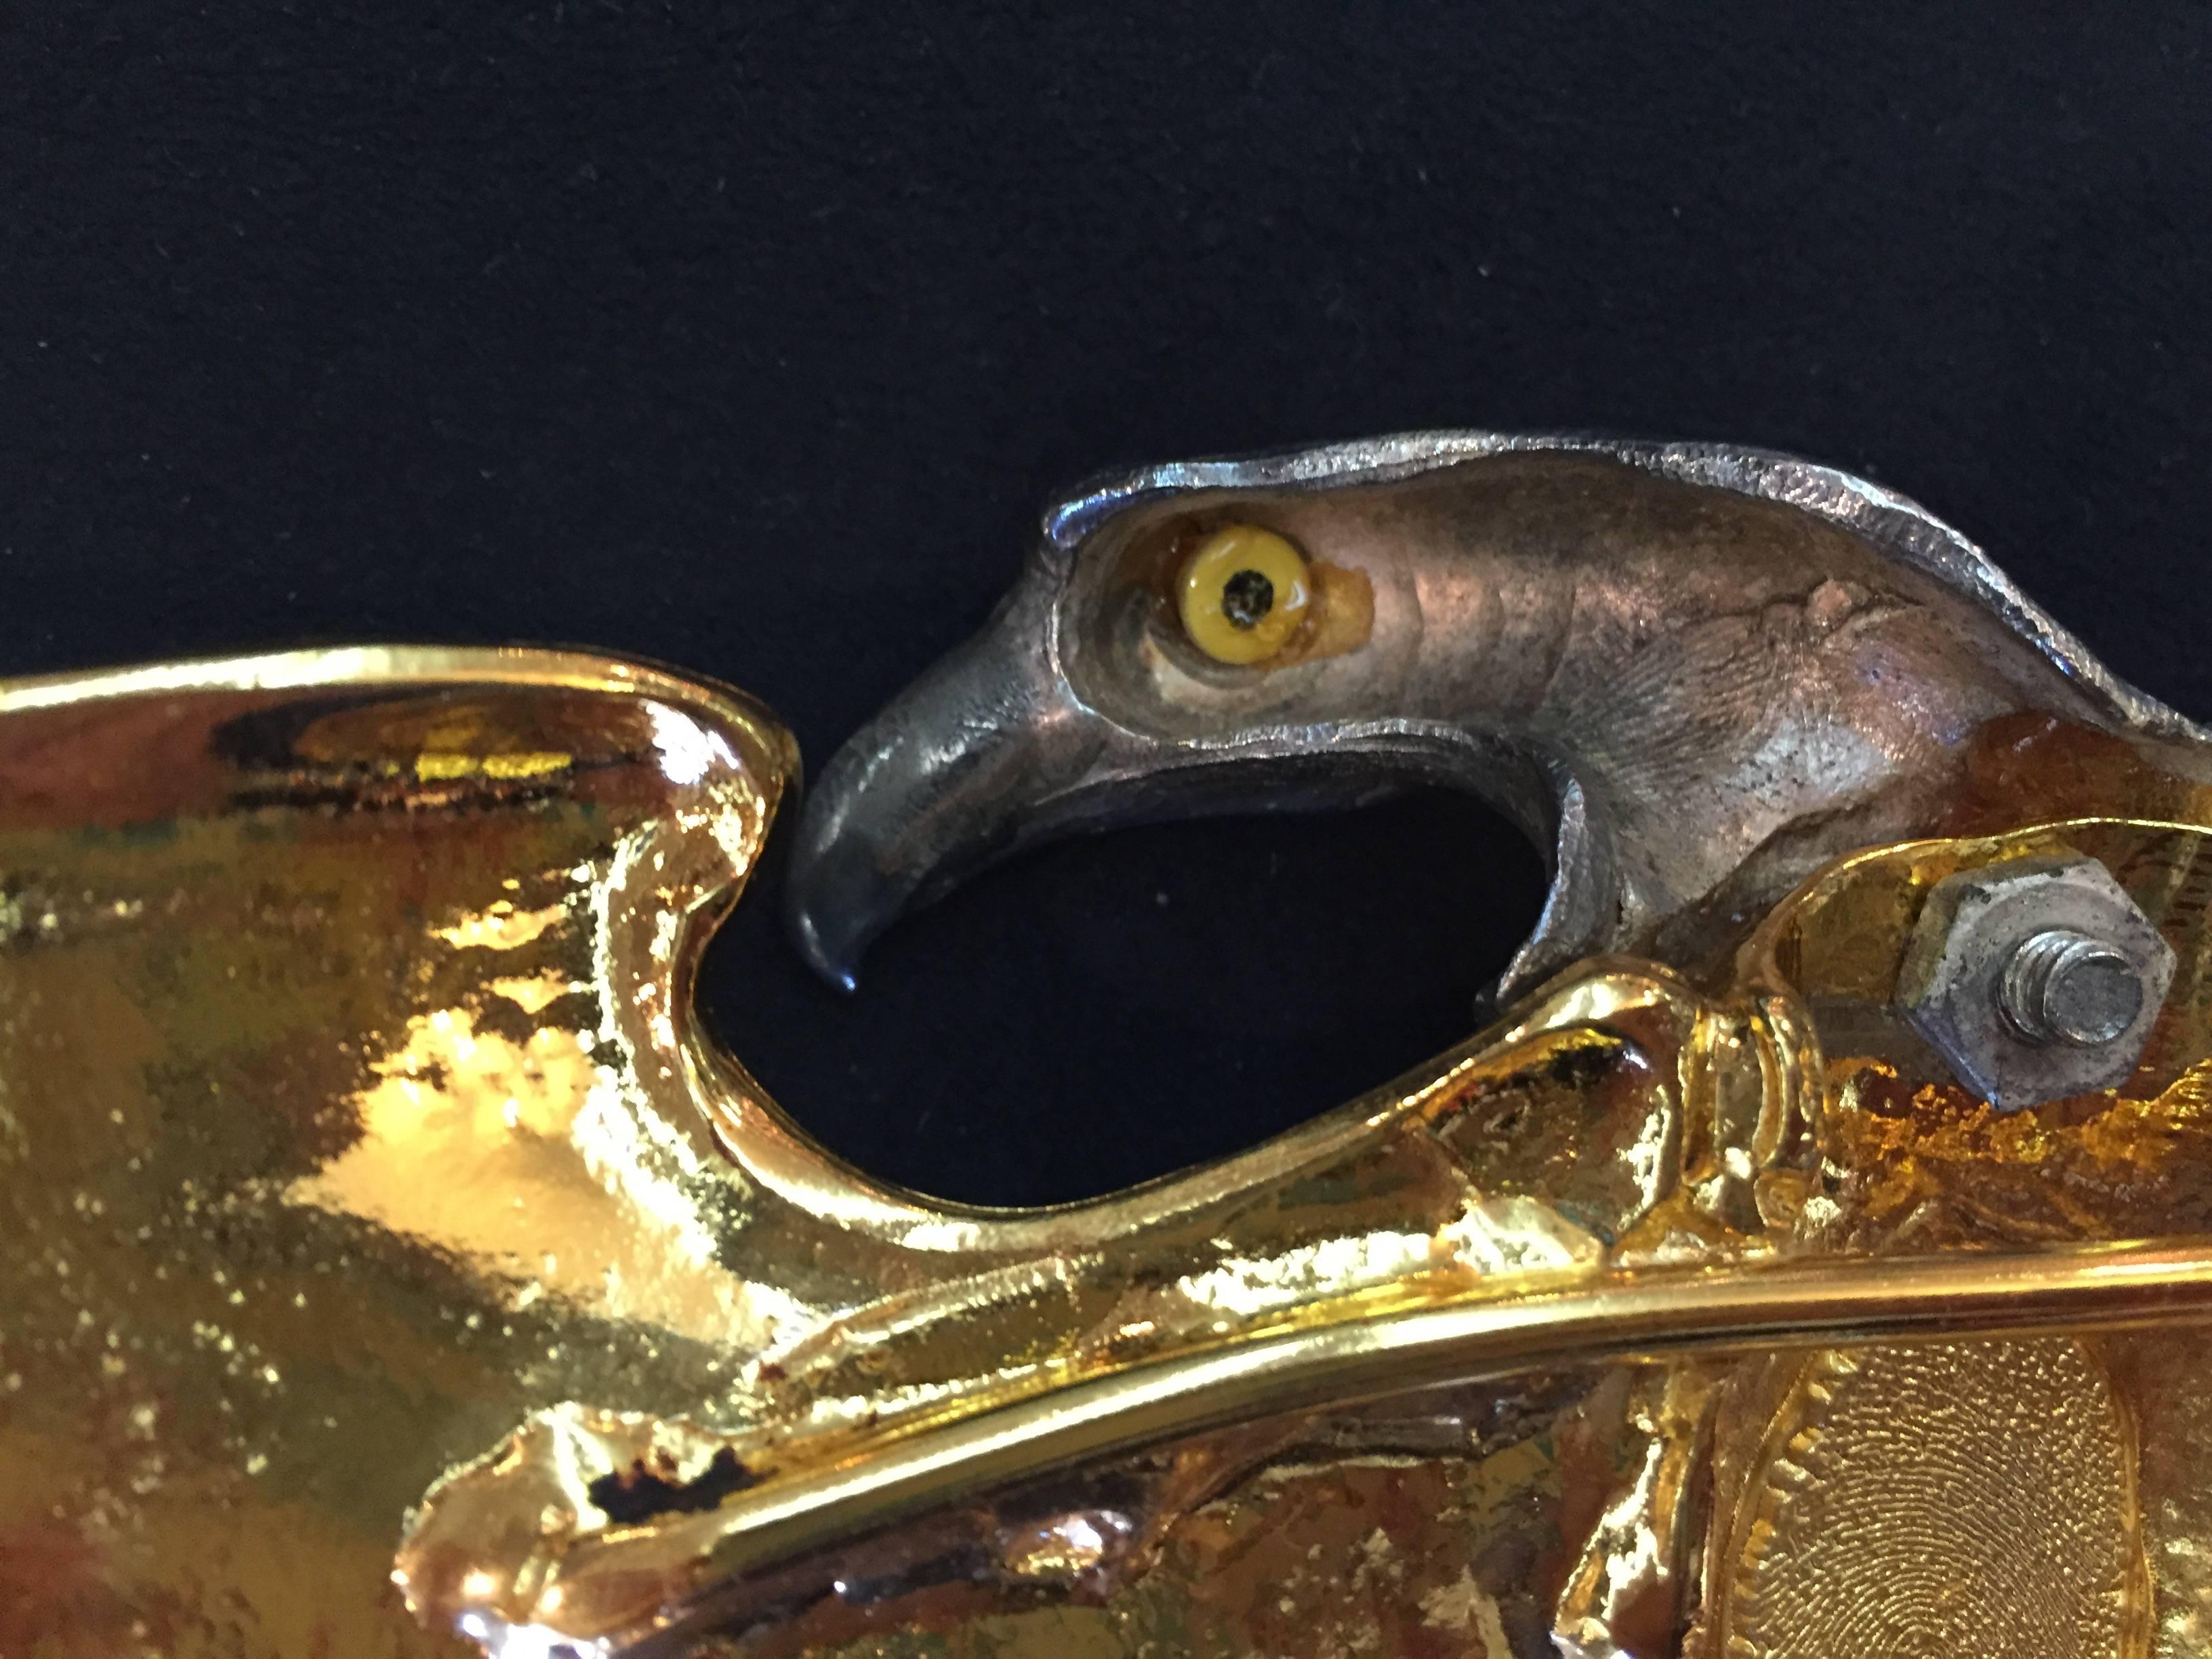 Exquisitely crafted vintage Christopher Ross American Bald Eagle belt buckle sculpture. Sculpture is 24K gold plated with a silver head, this striking statement piece is adorned with a glass eye and unique fingerprint marking. This piece is signed